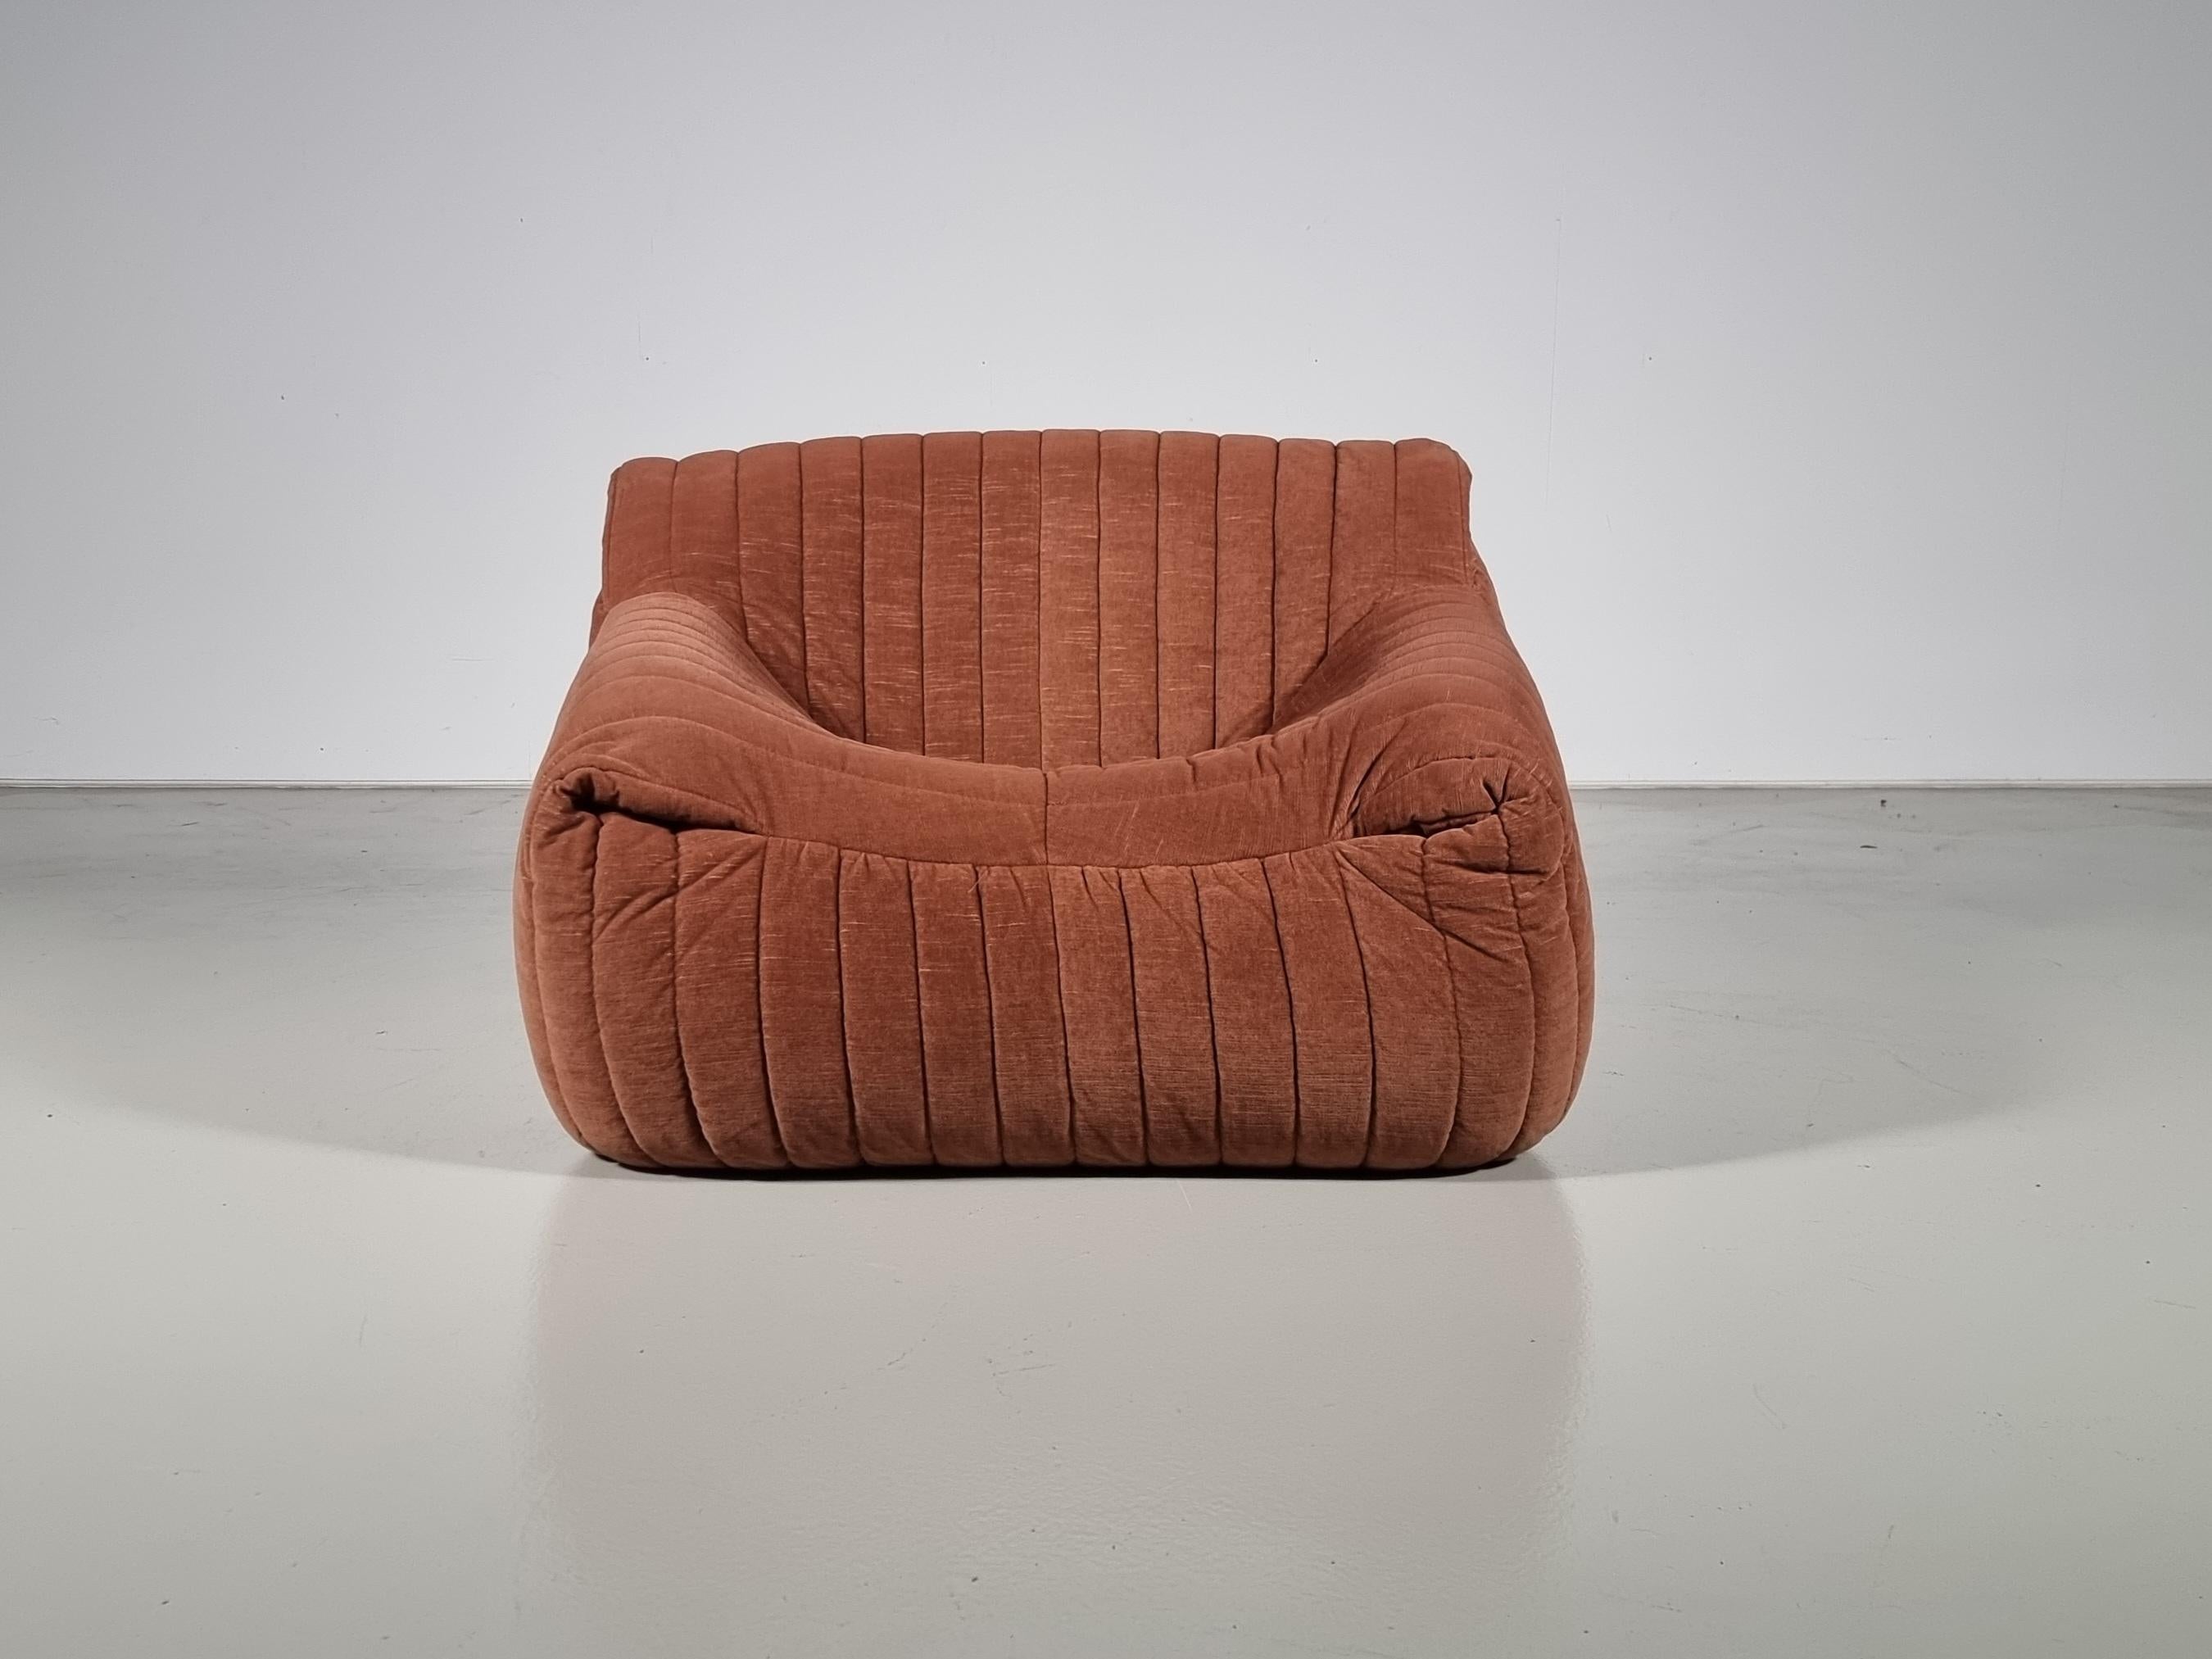 The Sandra lounge chair was designed by Annie Hiéronimus for Cinna after she joined the Roset Bureau d'Etudes in 1976.

Constructed fully from foam, the chair has a solid form. Upholstered in its original rusty/brown fabric. It's extremely